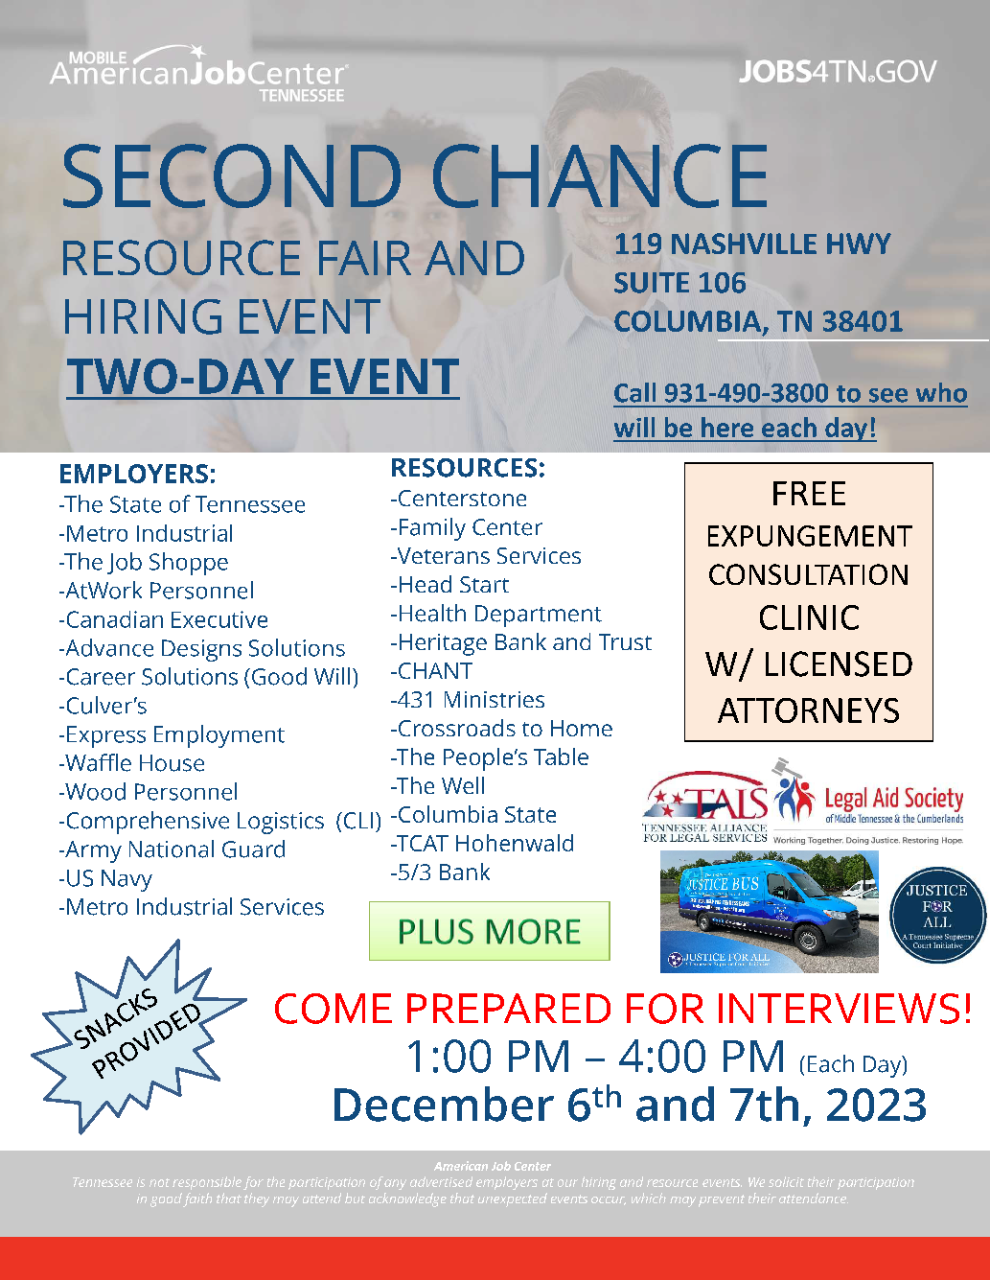 Second Chance Resource Fair and Hiring Event, Columbia, TN, September 20 and 21, 2023